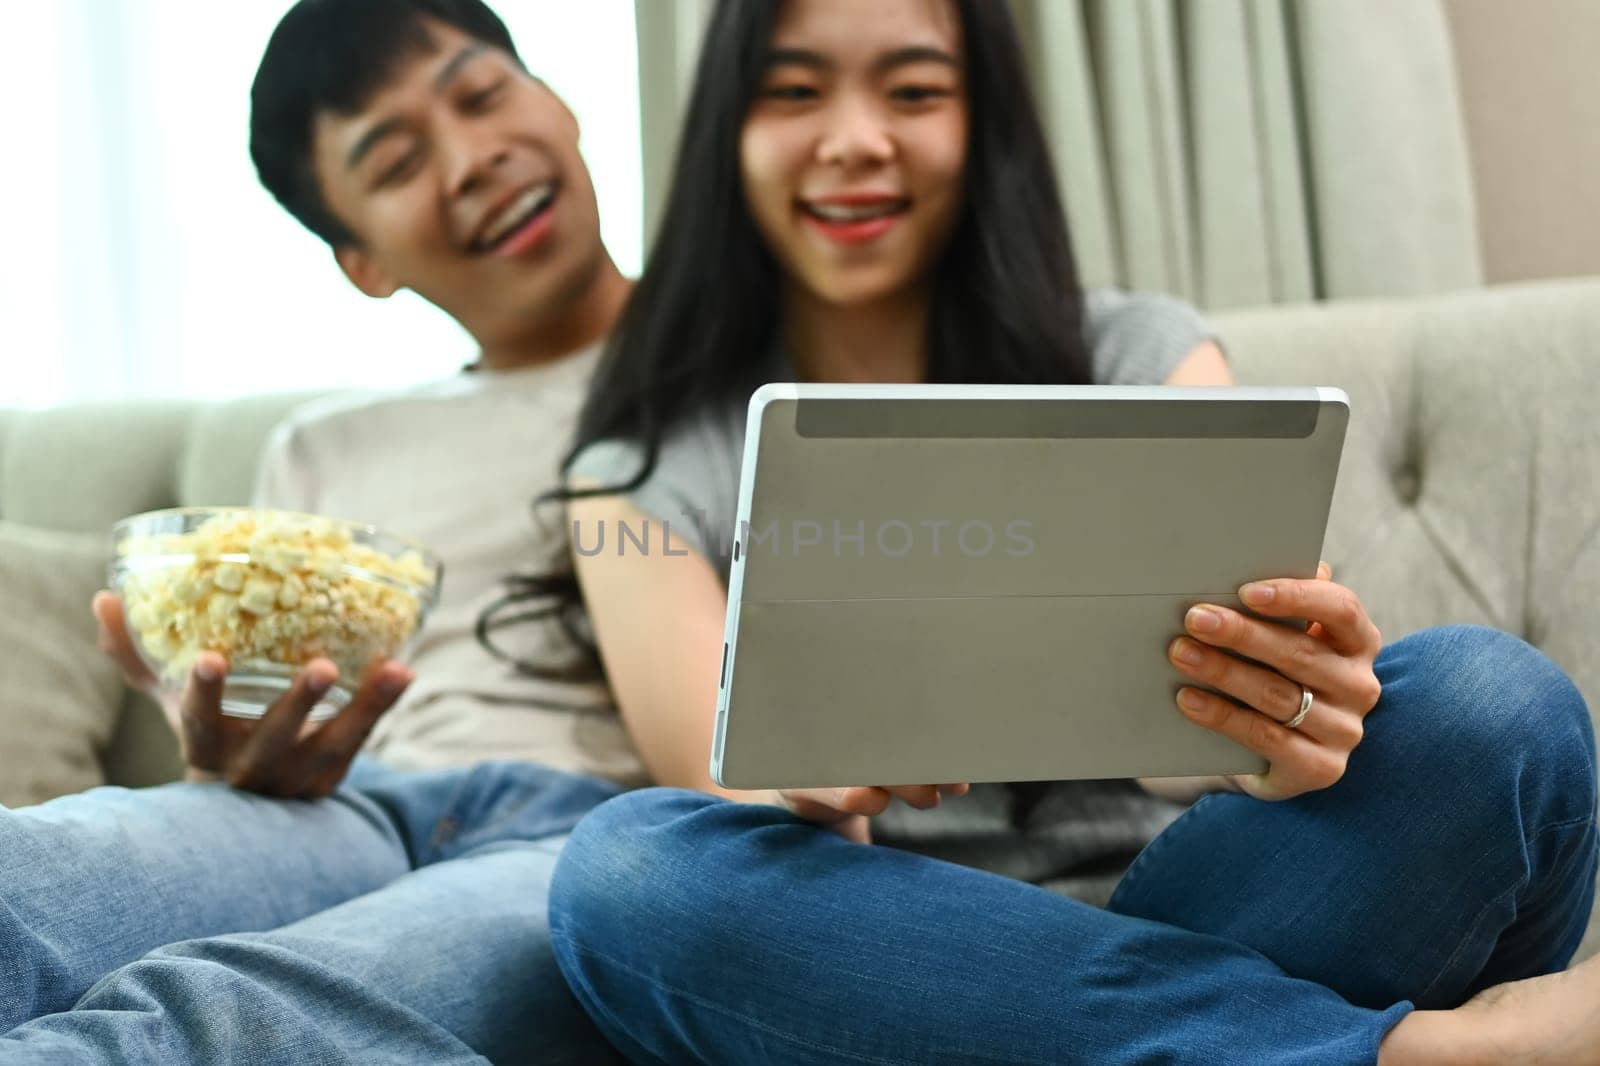 Smiling young couple eating pop corn and watching movie on digital tablet in living room.